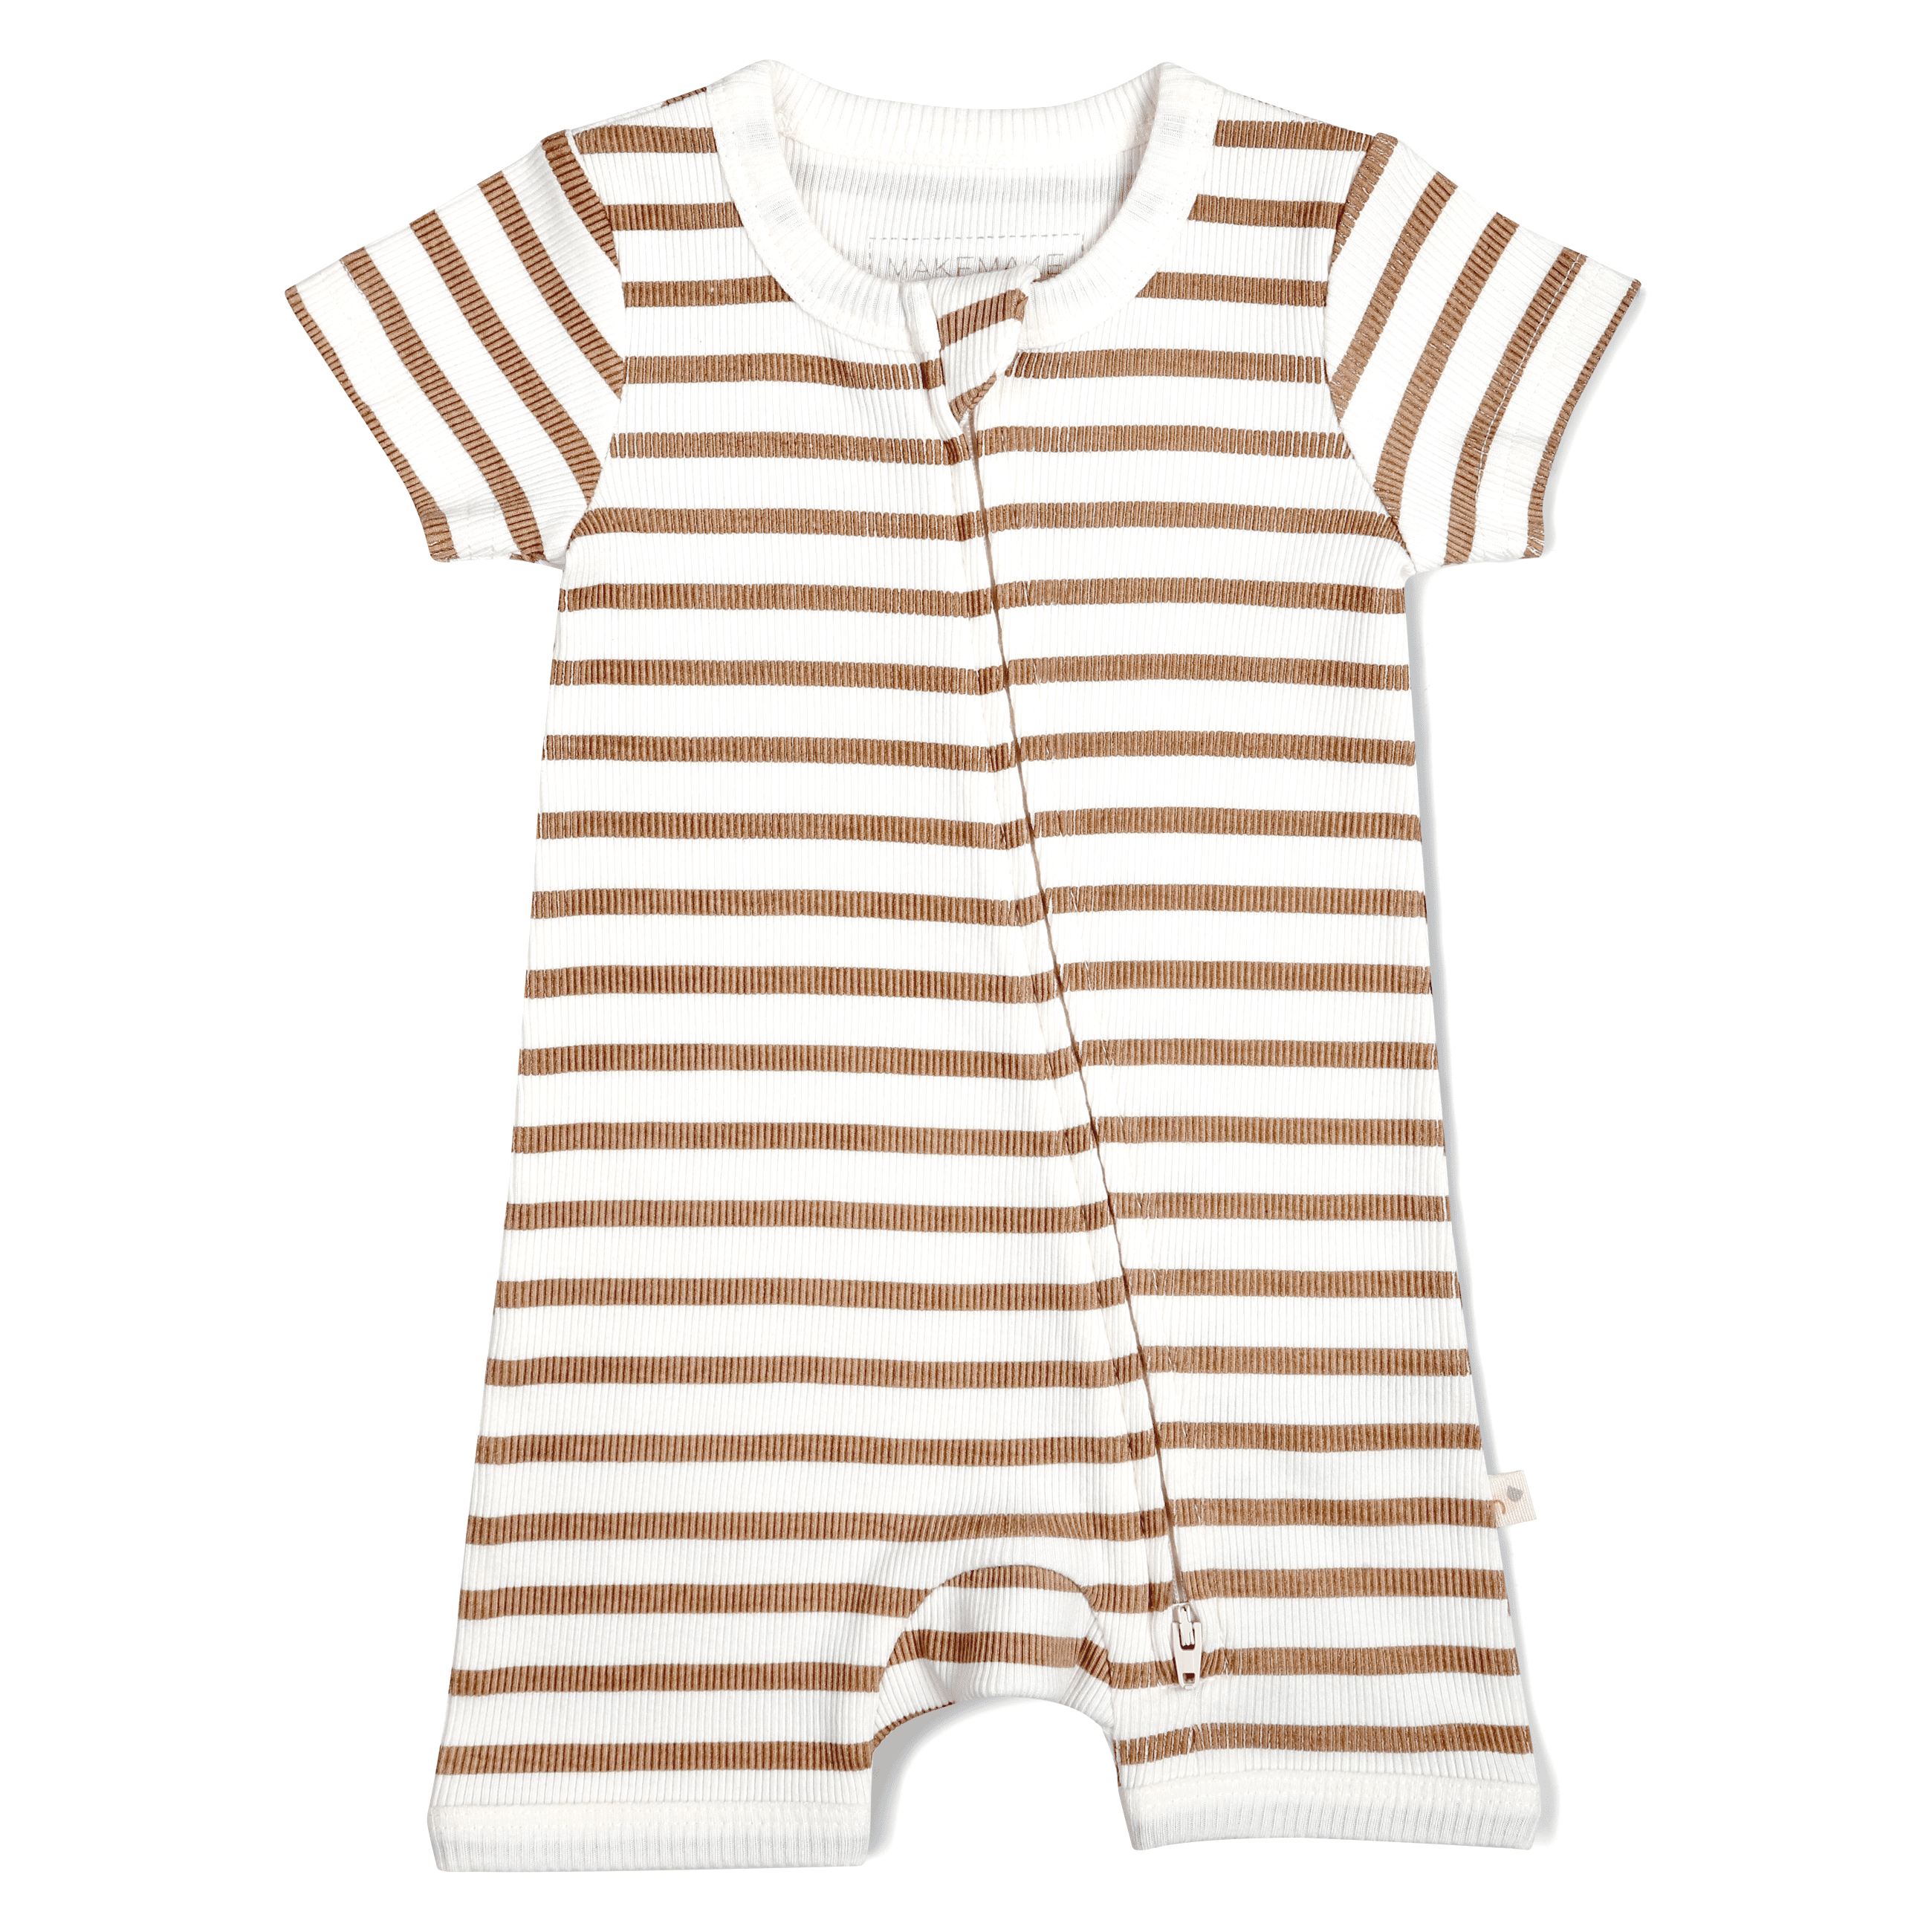 A flat-laid, short-sleeved toddler romper with horizontal white and tan stripes. It features snap closures and a relaxed fit, ideal for comfortable wear. This is the Organic Short Zip Romper in Stripes from Makemake Organics.